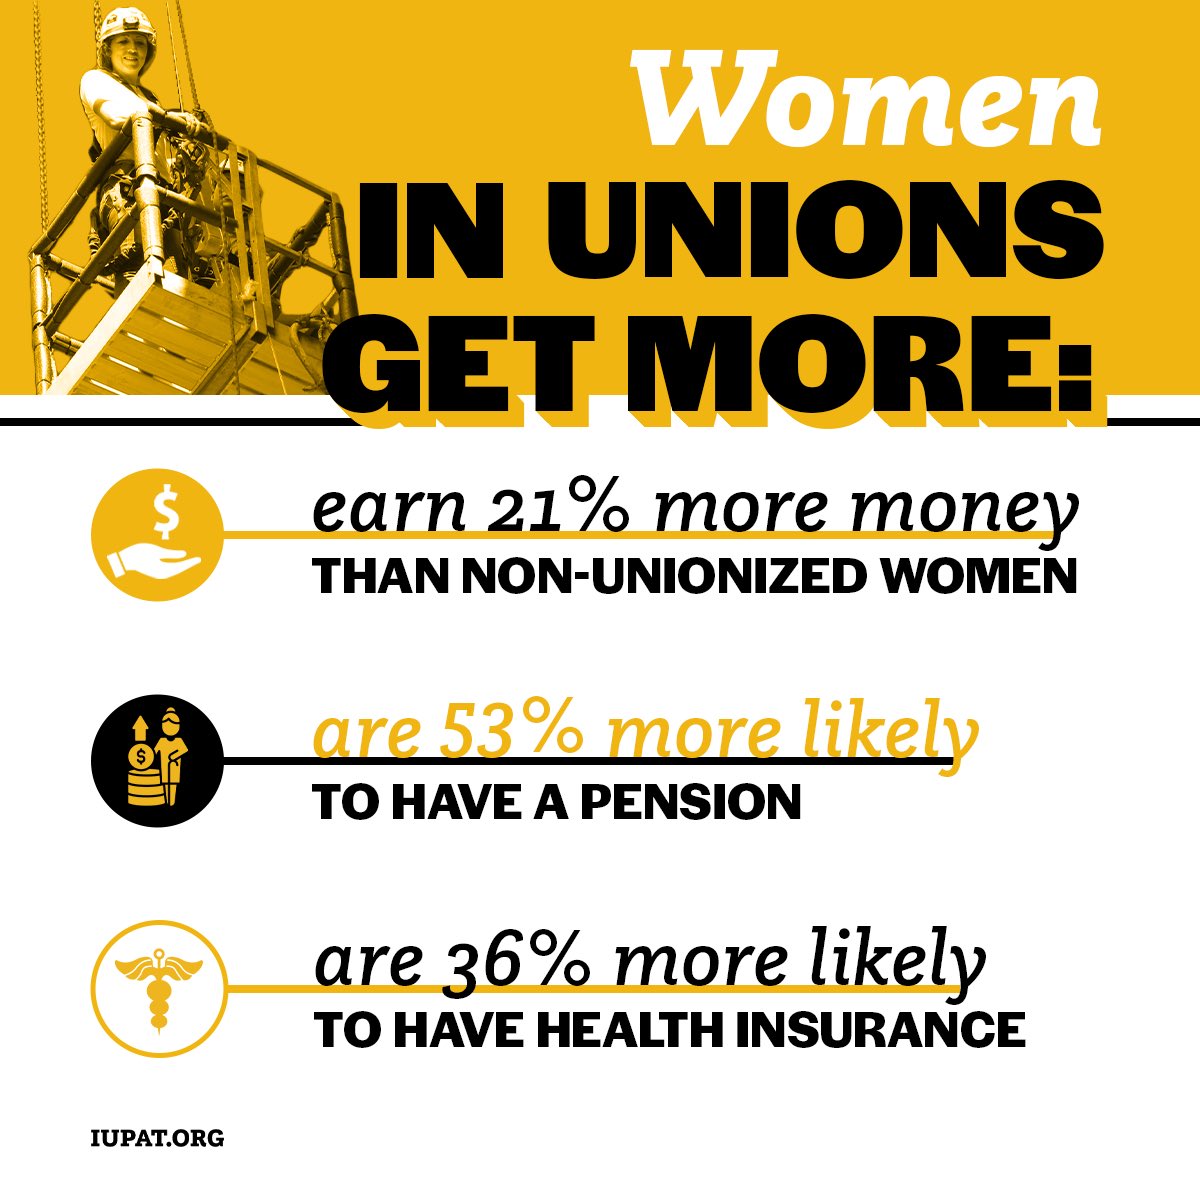 In the United States, women are still paid 78 cents for every dollar paid to men. Unions like ours empower women, earning nearly 21% more in wages than their nonunion counterparts. When more women have access to a union, we can close the wage gap and build working class power.